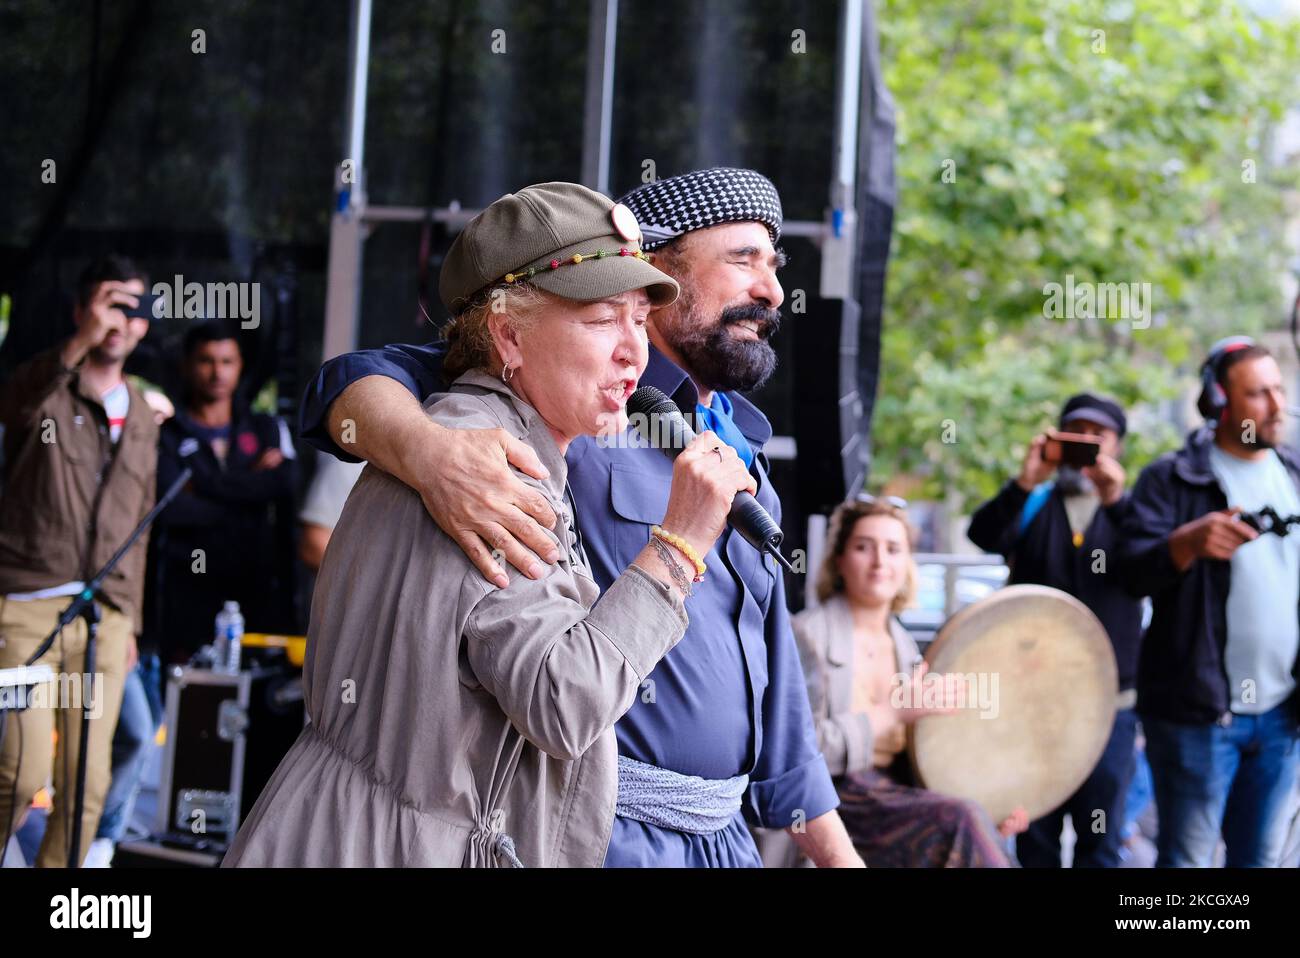 Sivan Perwer and Berivan Firat during the defend kurdistan concert in Paris, France, on July 4, 2021. On the weekend of July 3 and 4, Kurdish organizations around the world applied to denounce the Turkish aggression in Iraqi Kurdistan. In Paris, a demonstration and a concert were held to denounce the Turkish military intervention. (Photo by Vincent Koebel/NurPhoto) Stock Photo